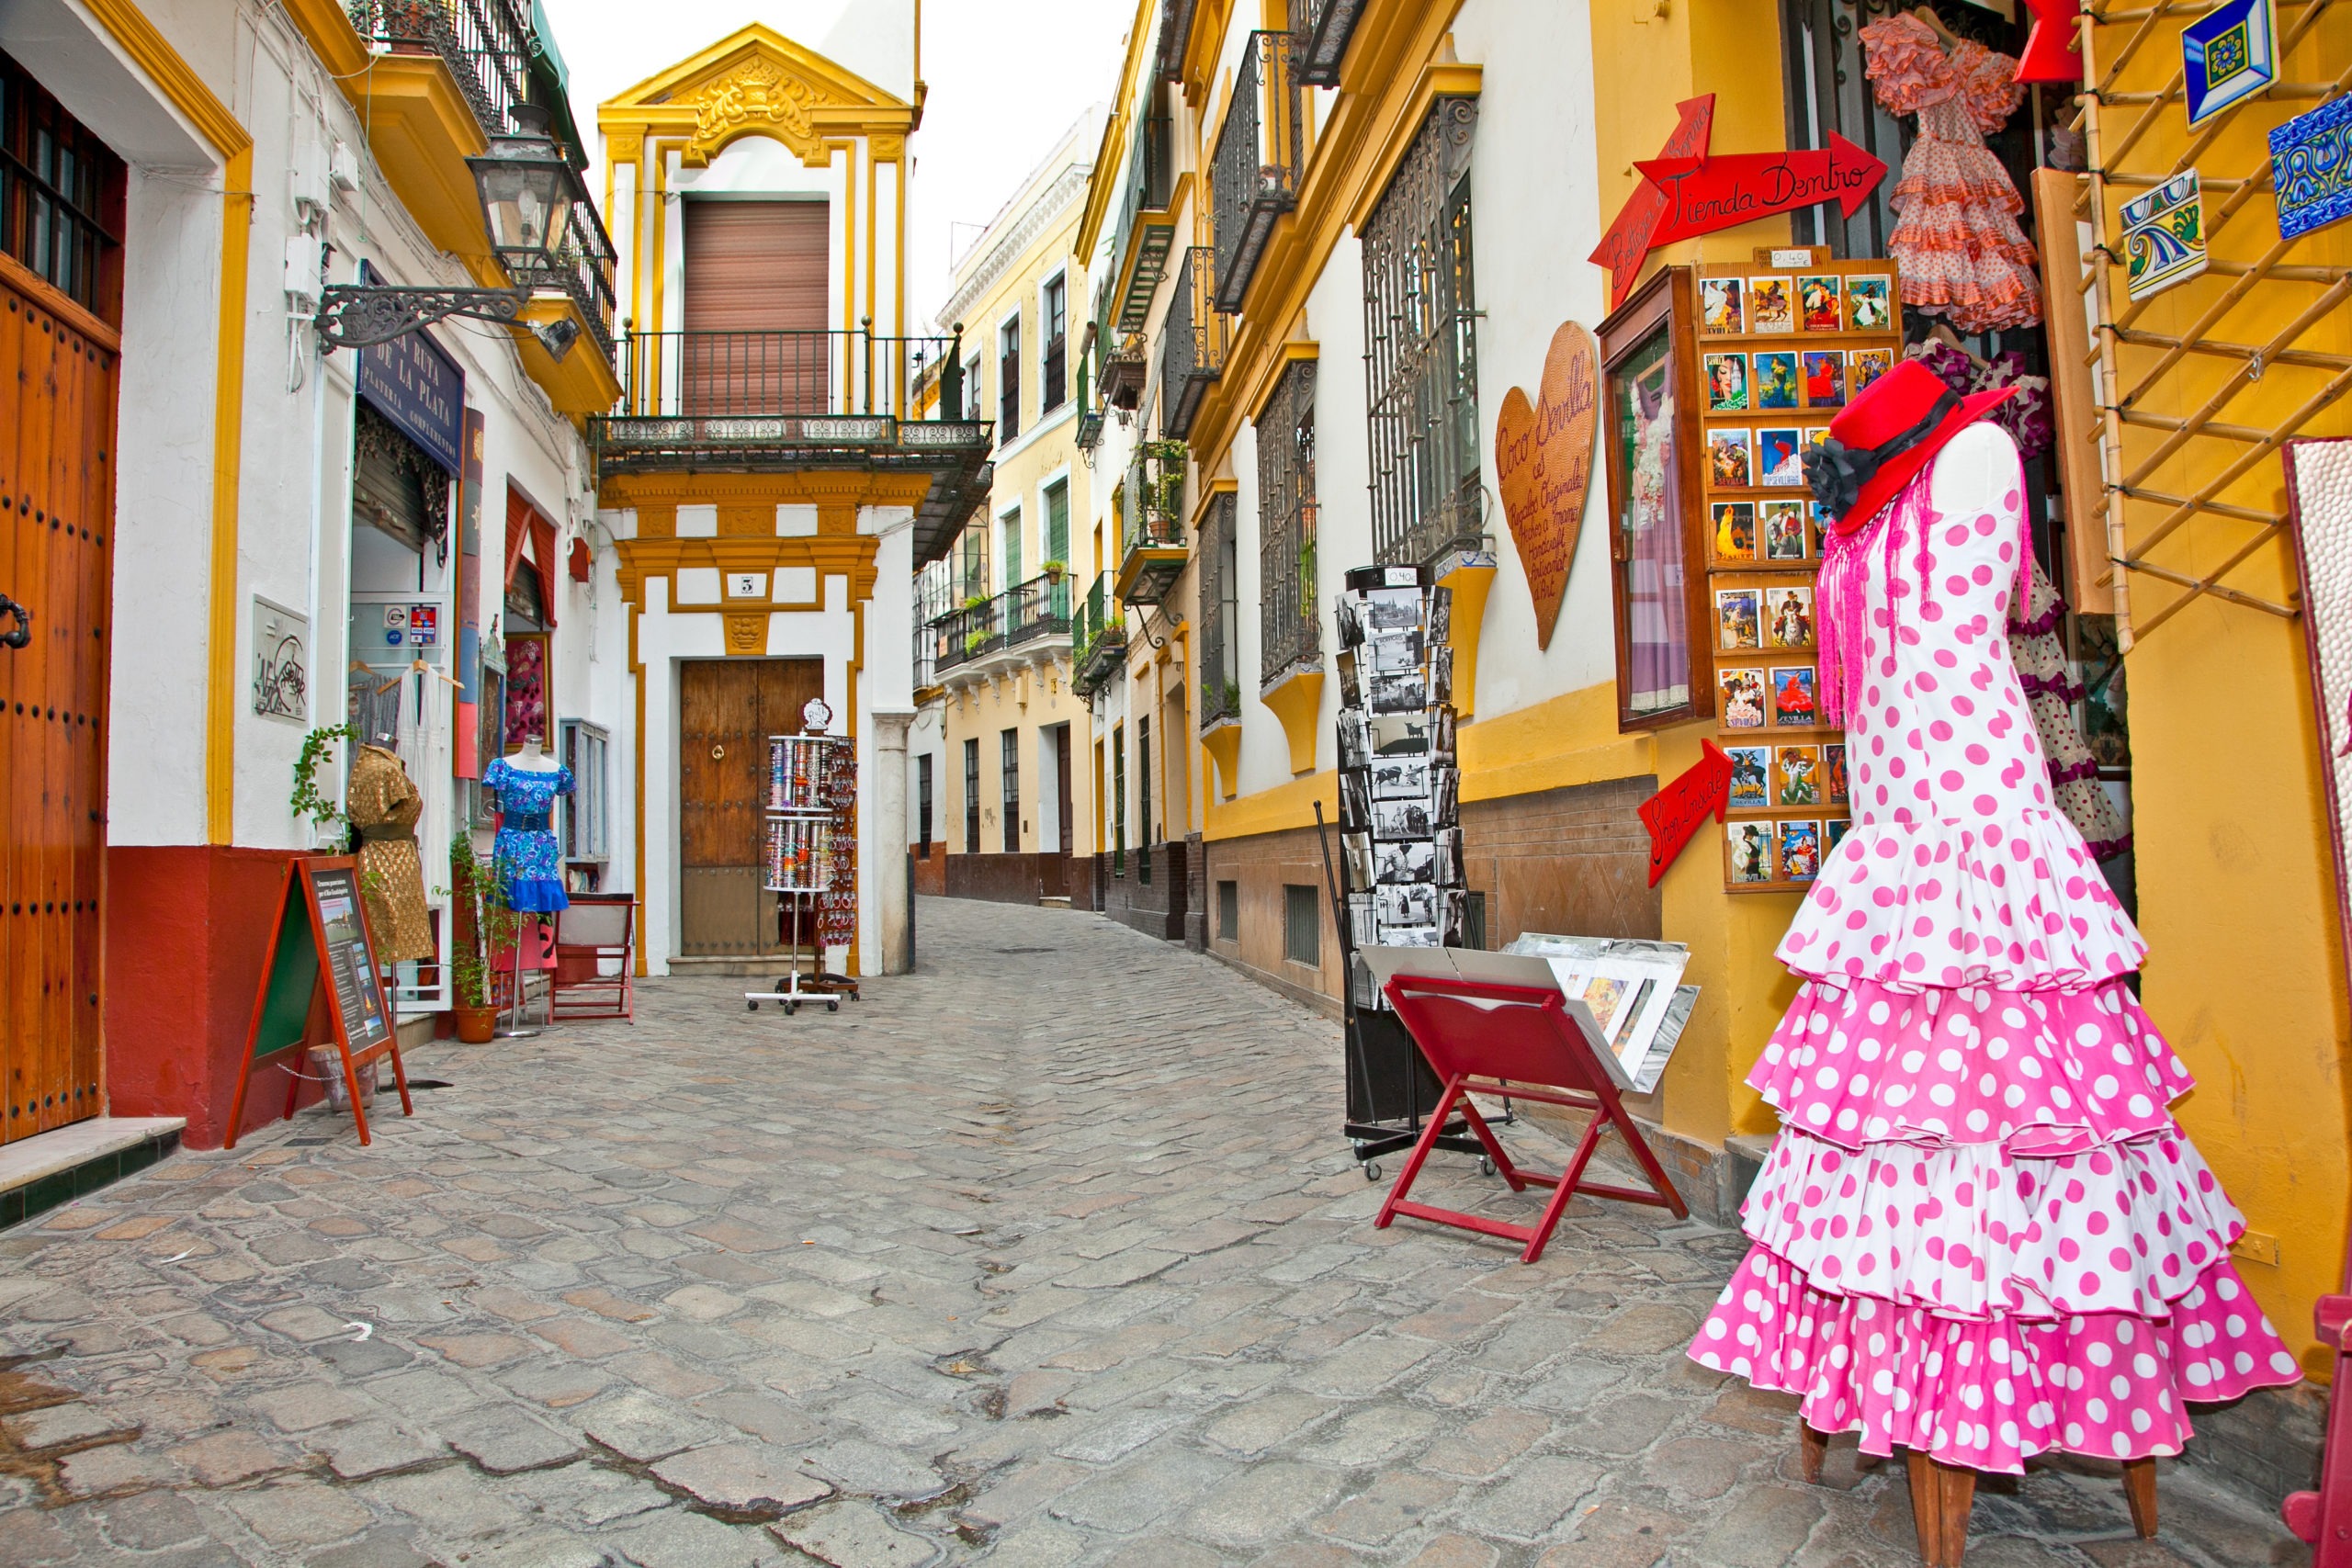 SEVILLE, SPAIN - SEP 11: Shopping street with typical flamenco dress on Sep 11, 2011 in Seville, Spain. The most typical Spanish flamenco dress features a polka dotted pattern is Traje de Lunares.